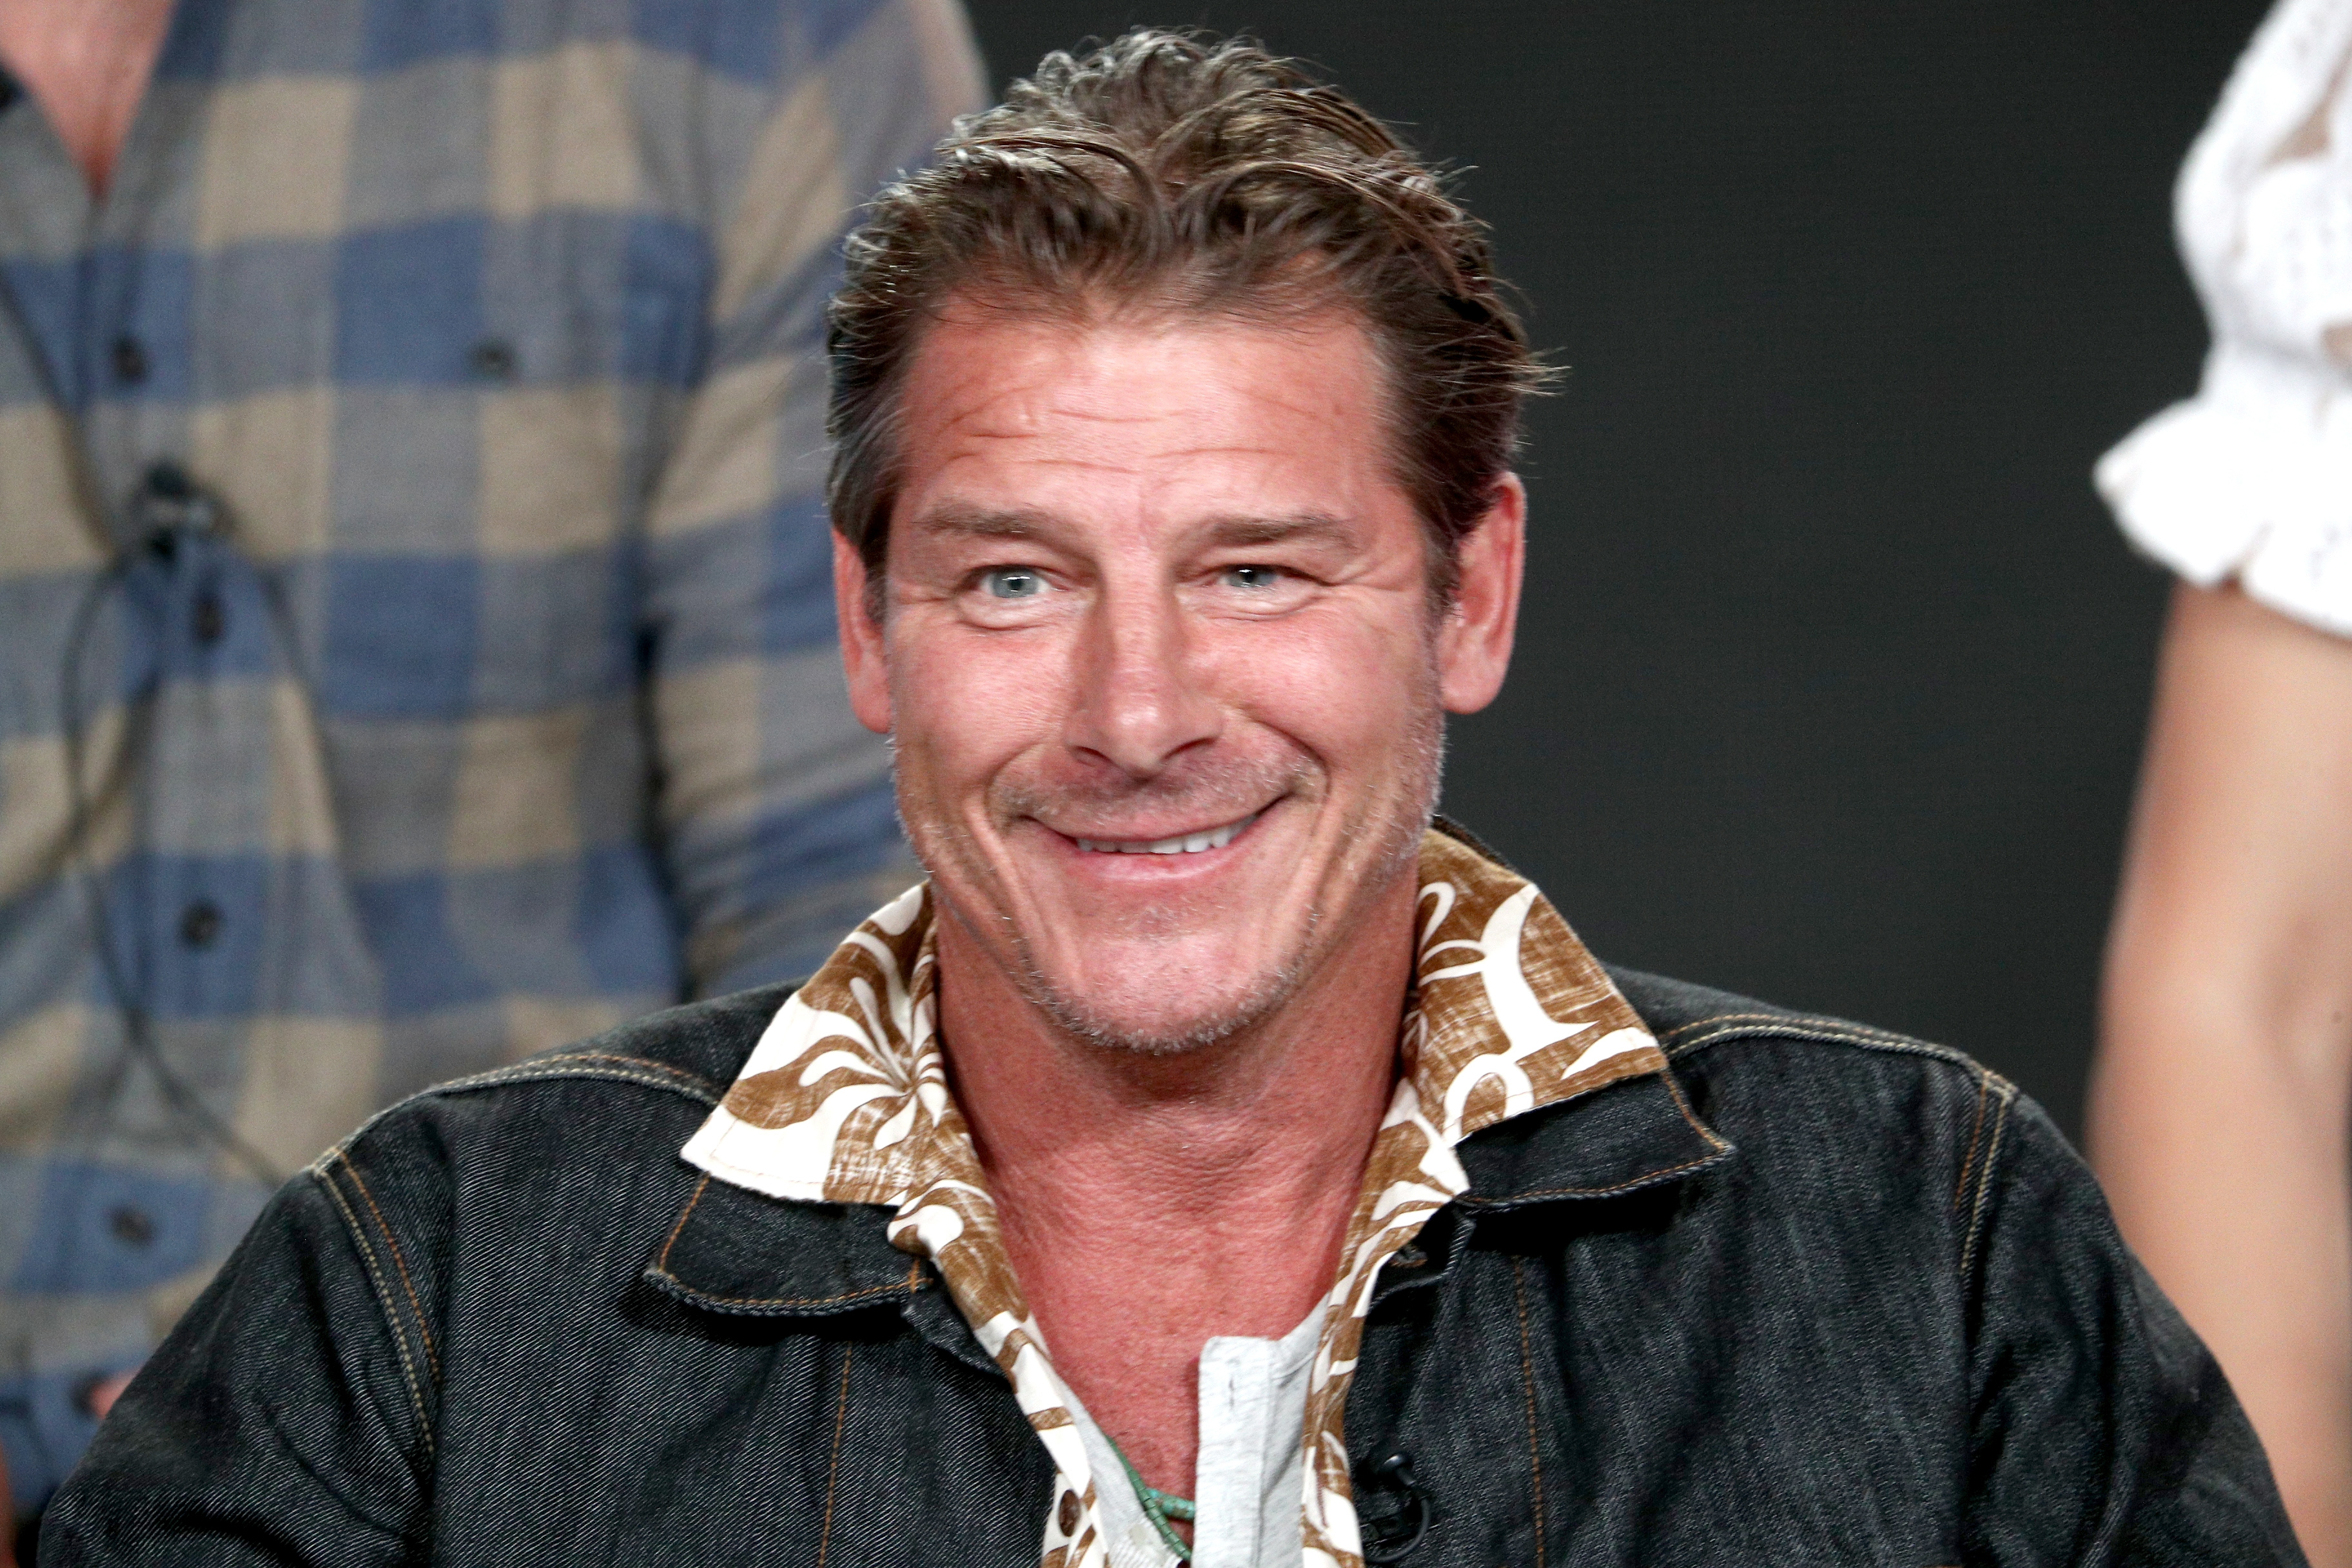 A smiling man dressed in a patterned shirt and a denim jacket